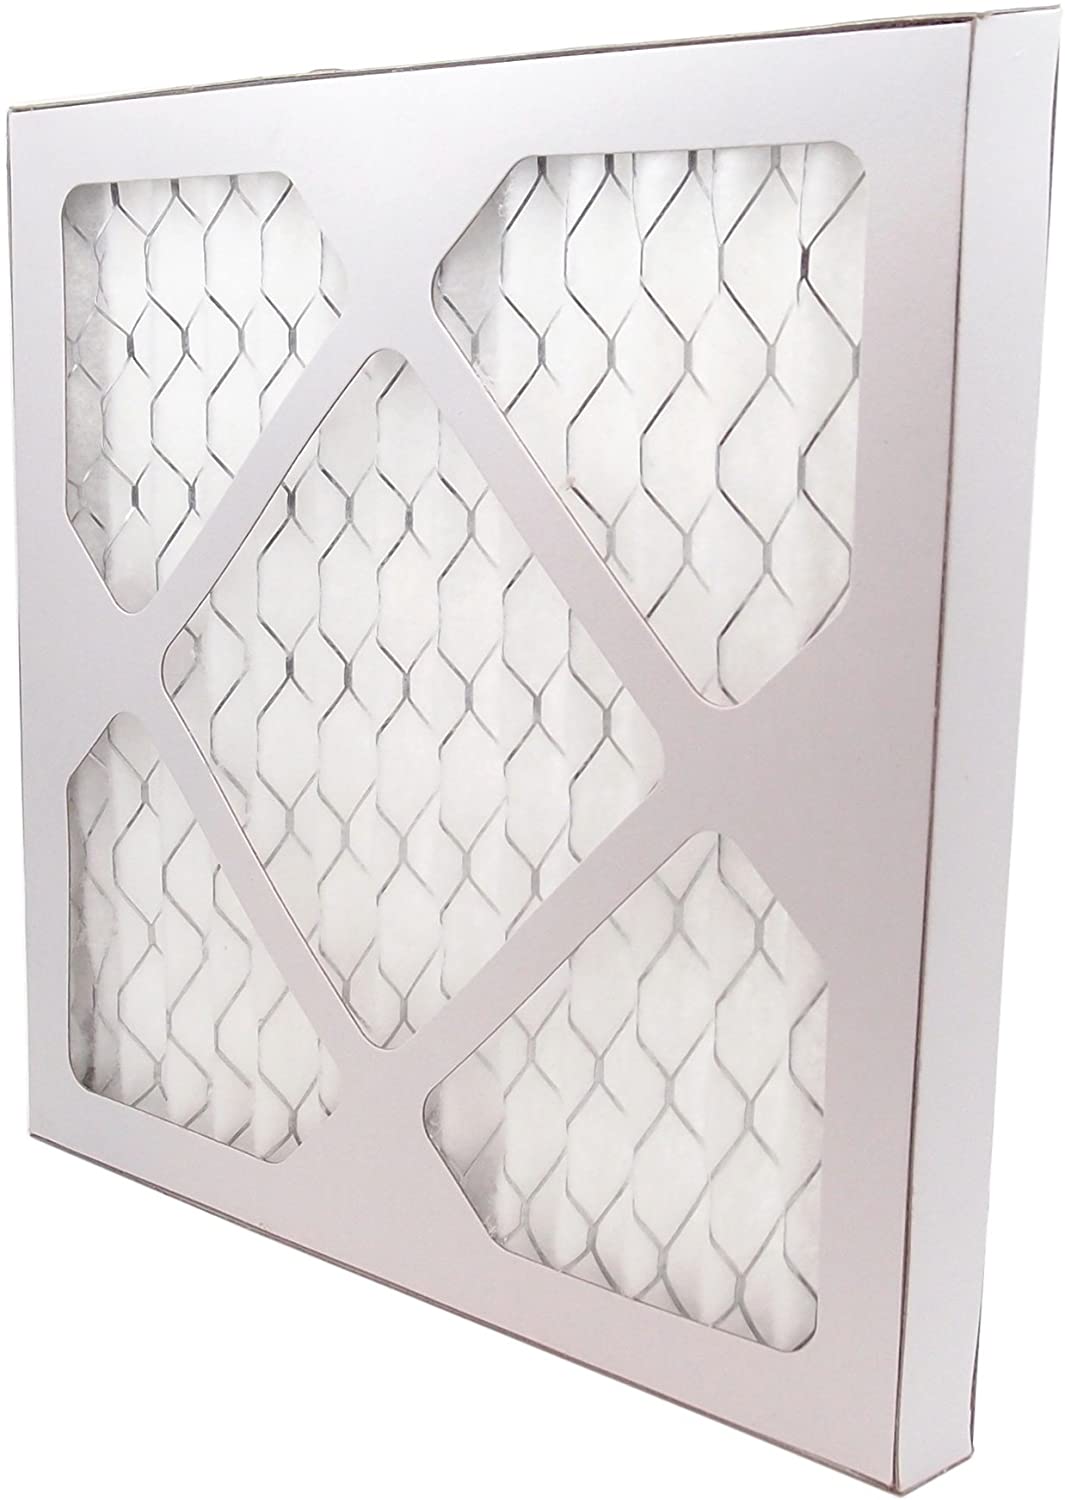 18&quot; x 24&quot; Pleated MERV 8 Filter for HVAC Return Filter Grille [Actual Dimensions: 17.75 X 23.75] 3-Pack